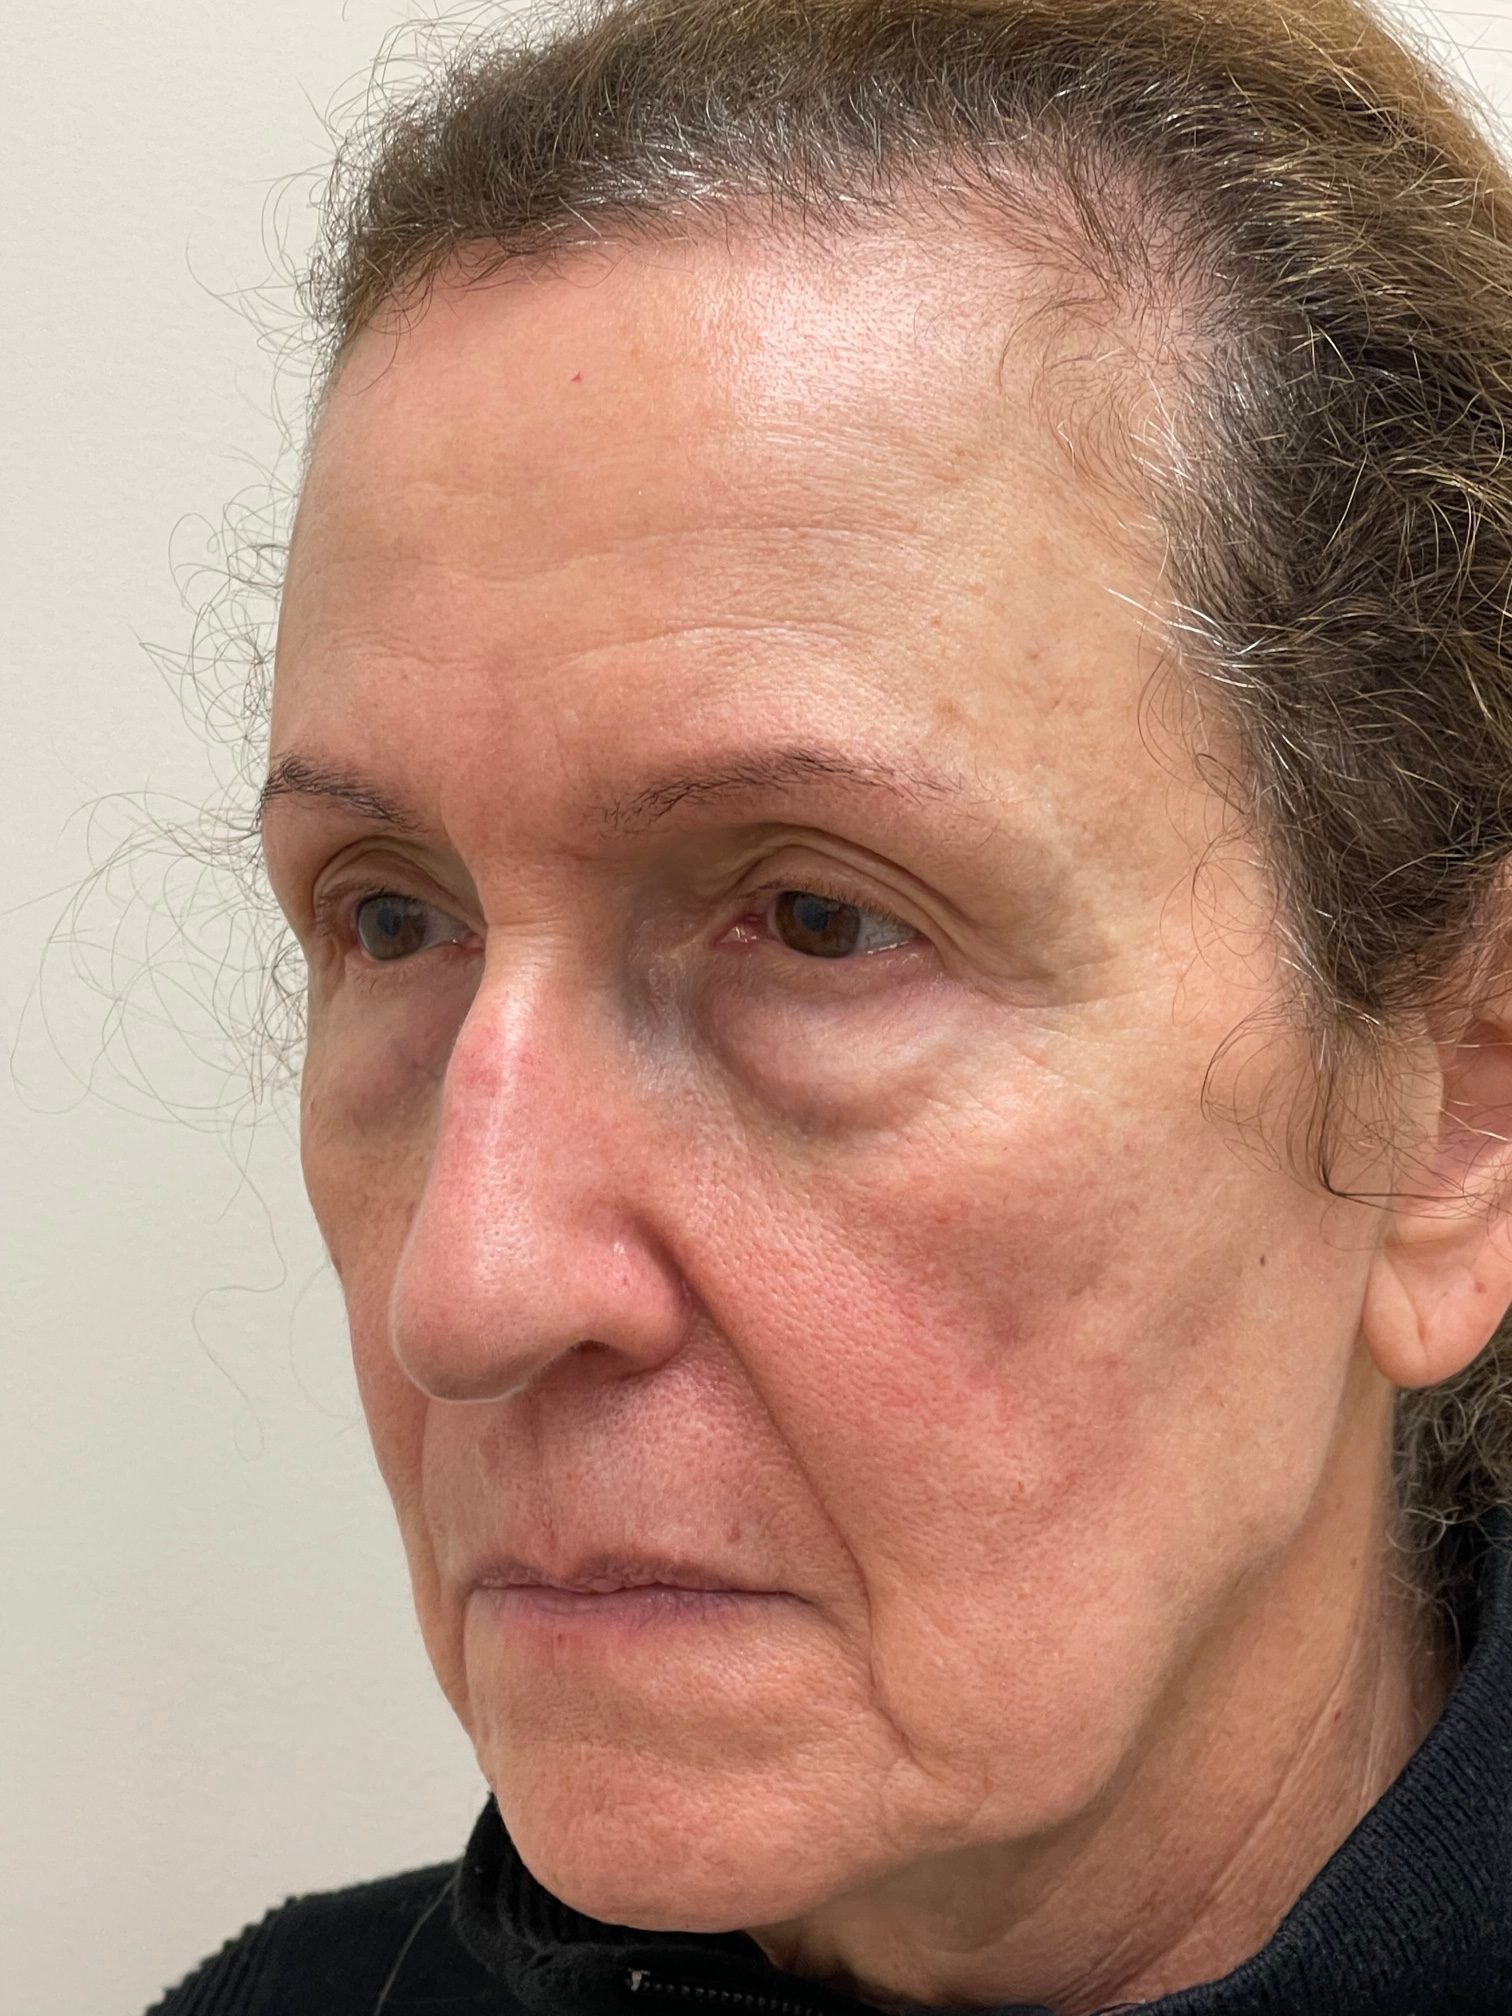 Photo of the patient’s face before the Blepharoplasty surgery. Patient 4 - Set 1